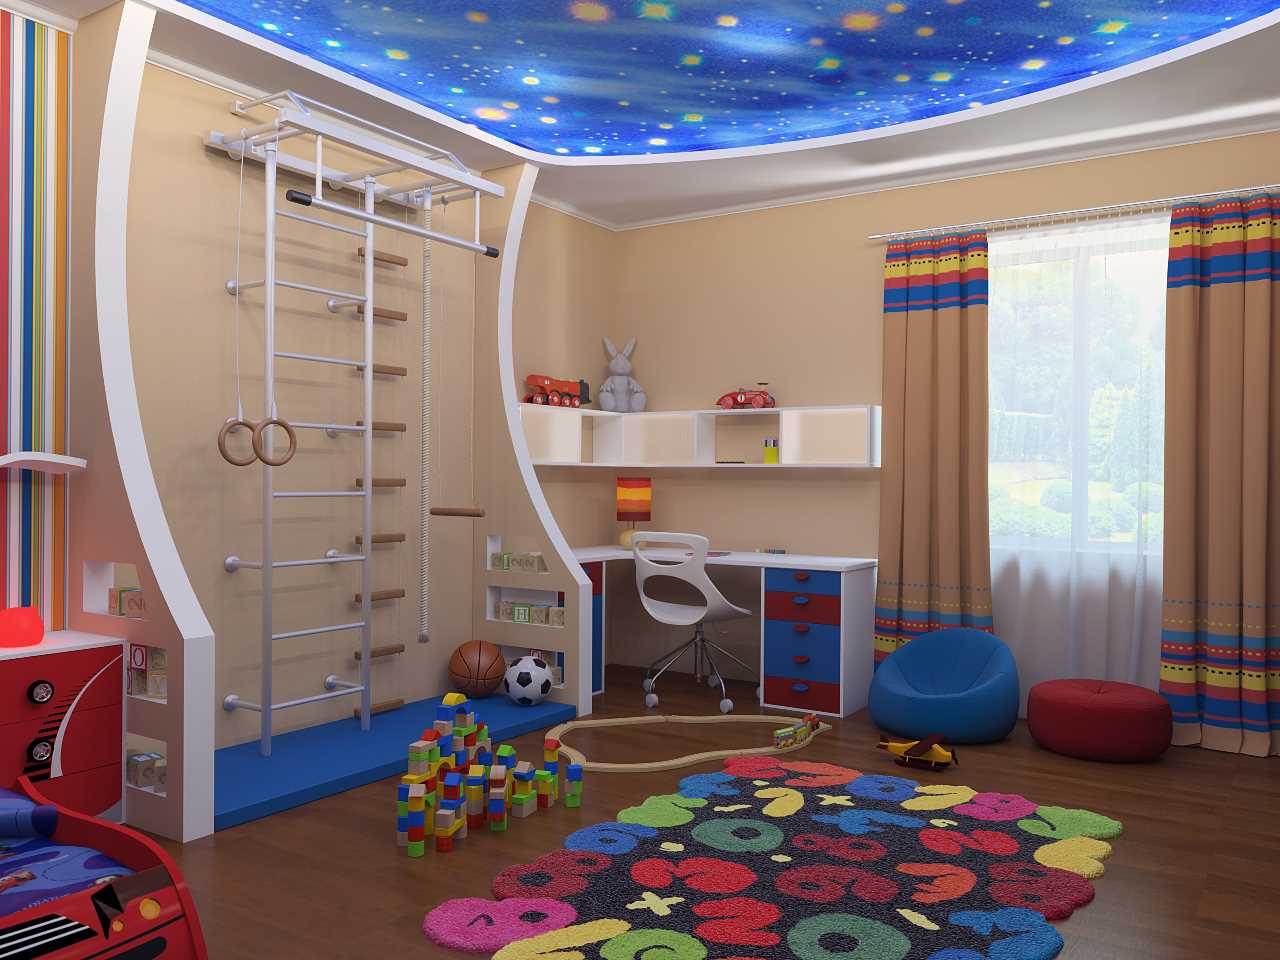 variant of a beautiful decor of a children's room for two boys